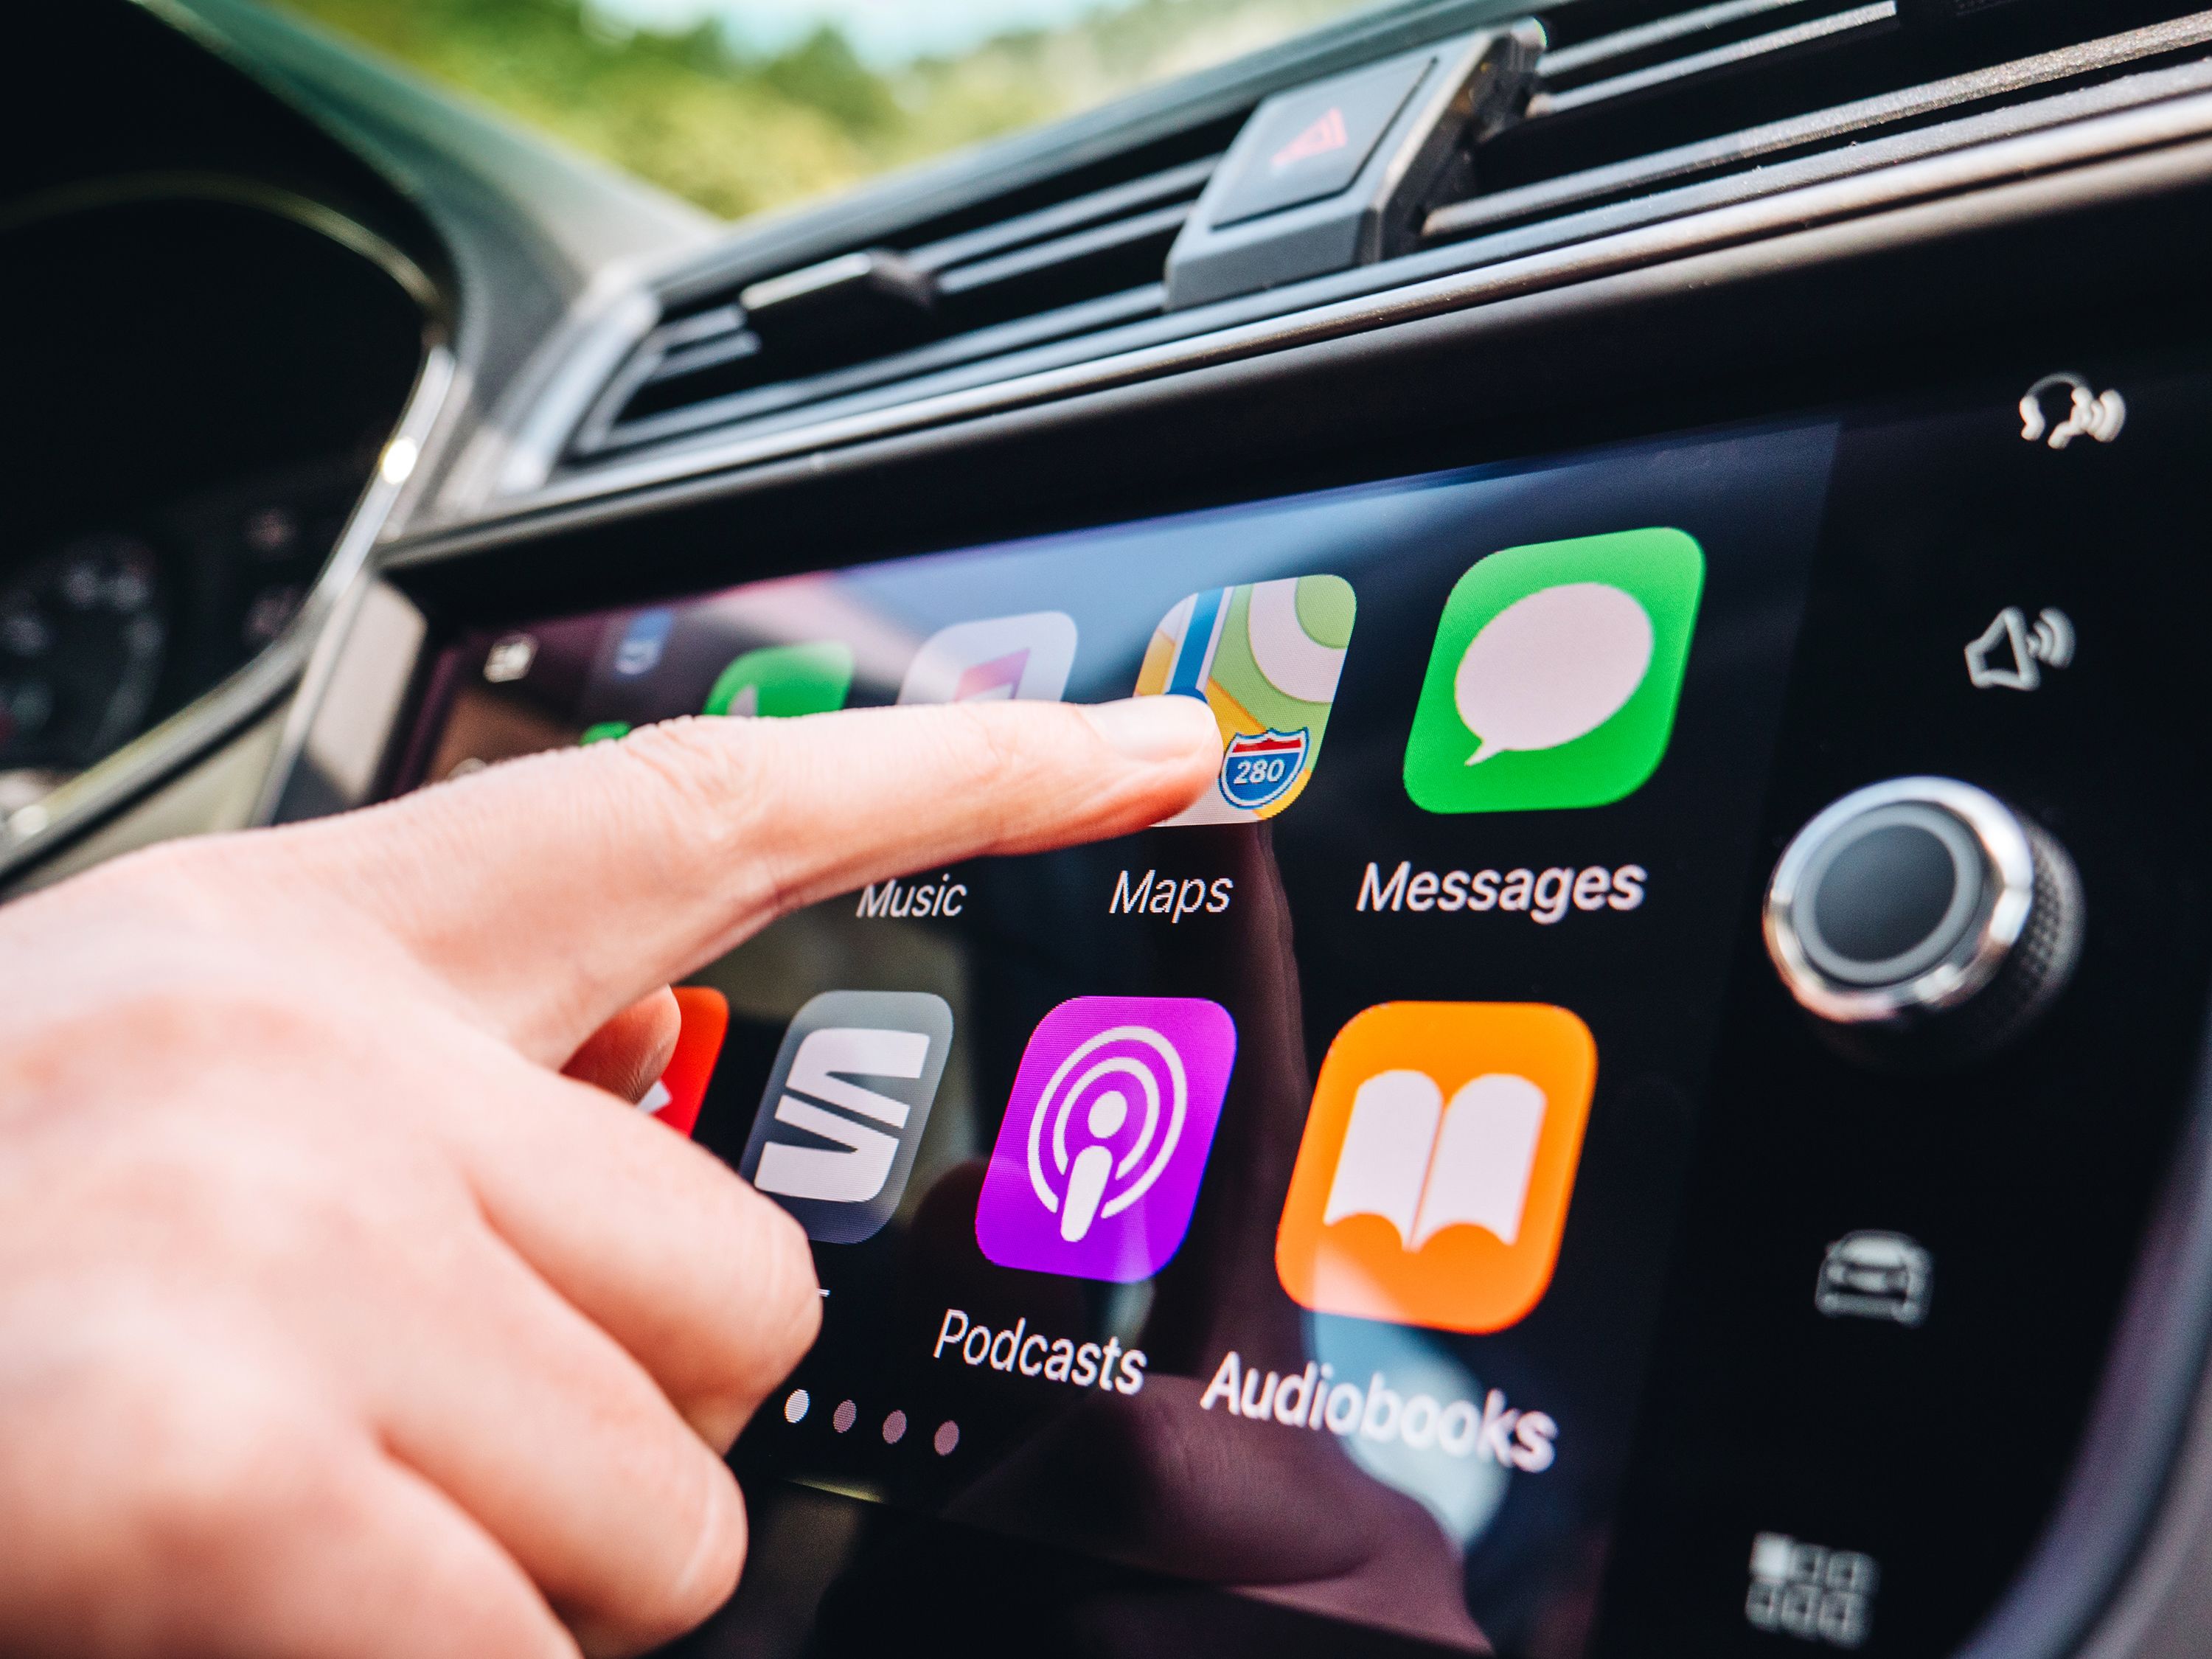 GM plans to phase out Apple CarPlay in EVs, with Google's help